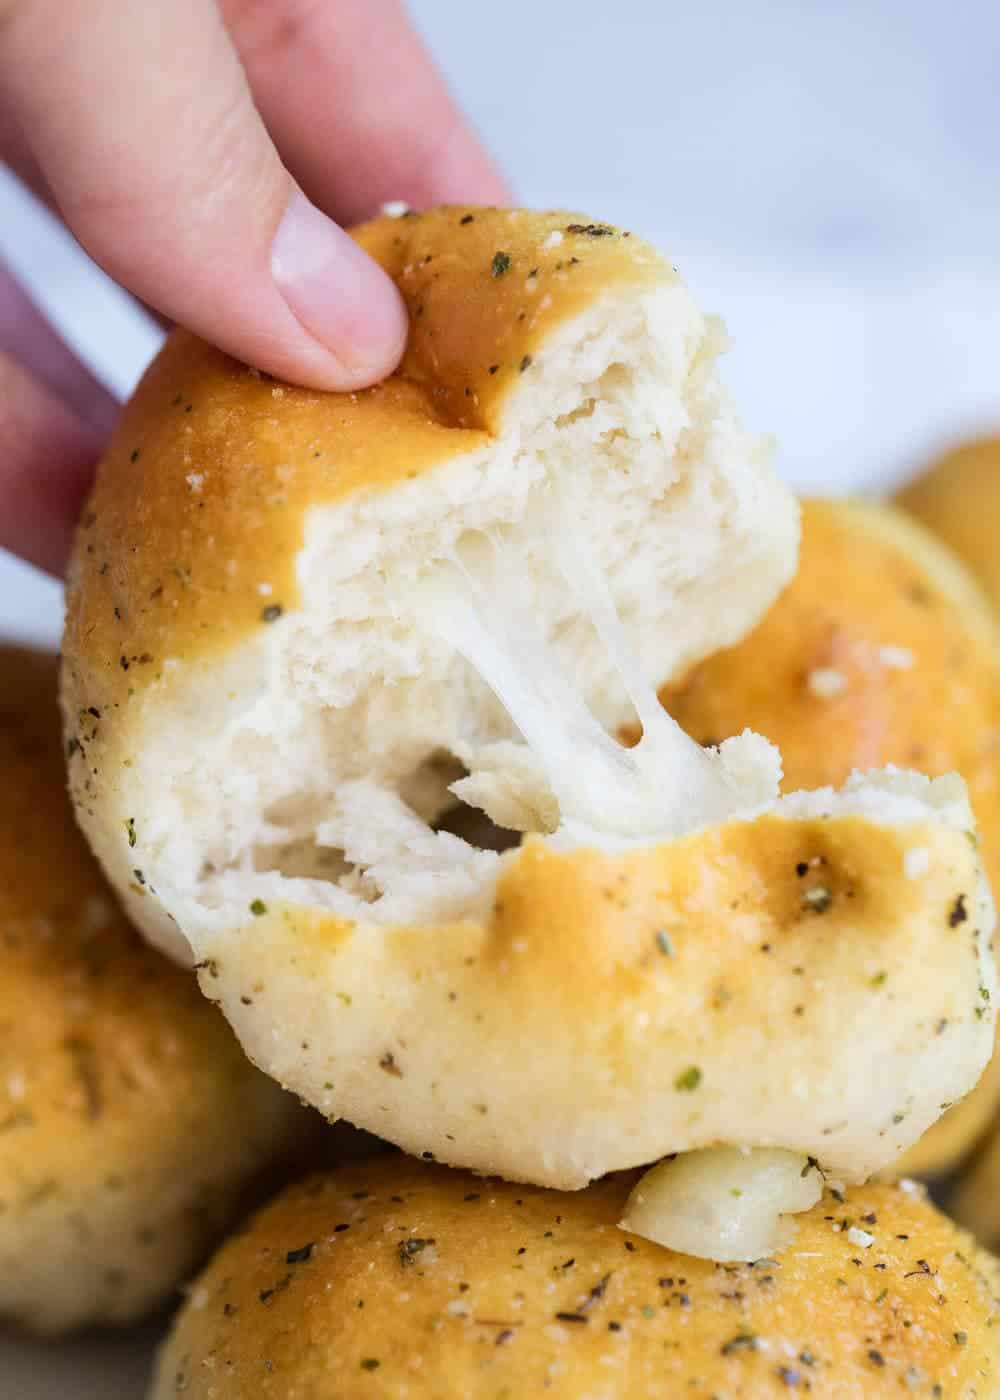 Cheesy Crescent Roll Garlic Knots With Parmesan (Easy!)